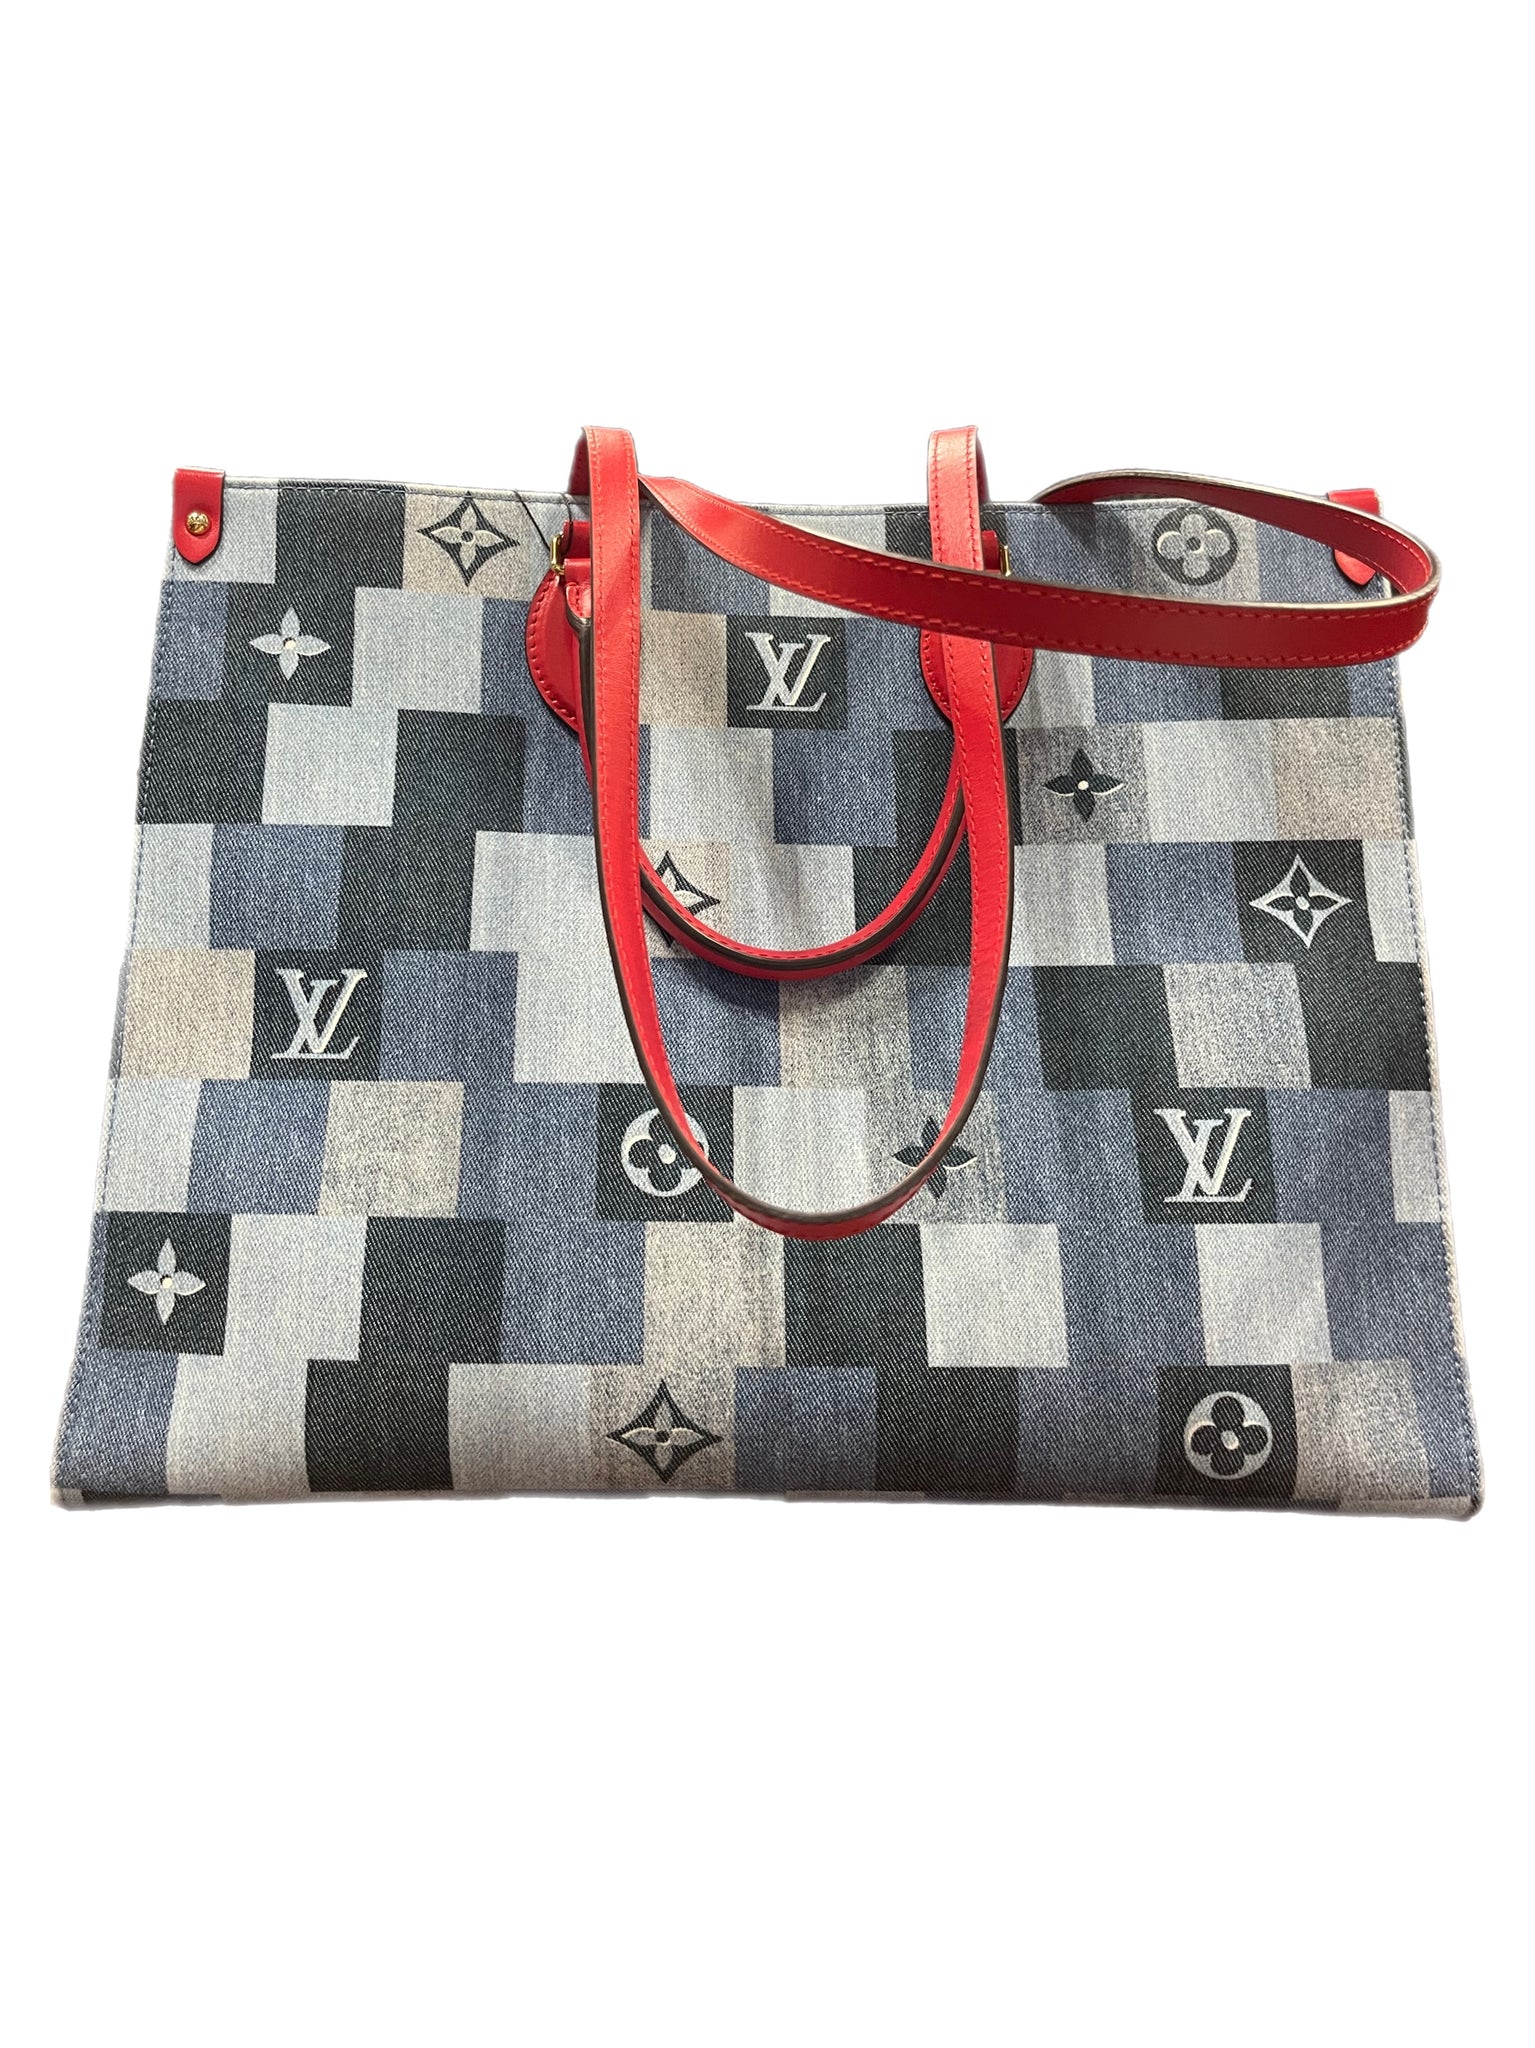 LOUIS VUITTON  DAMIER PATCHWORK ONTHEGO TOTE IN DENIM AND LEATHER